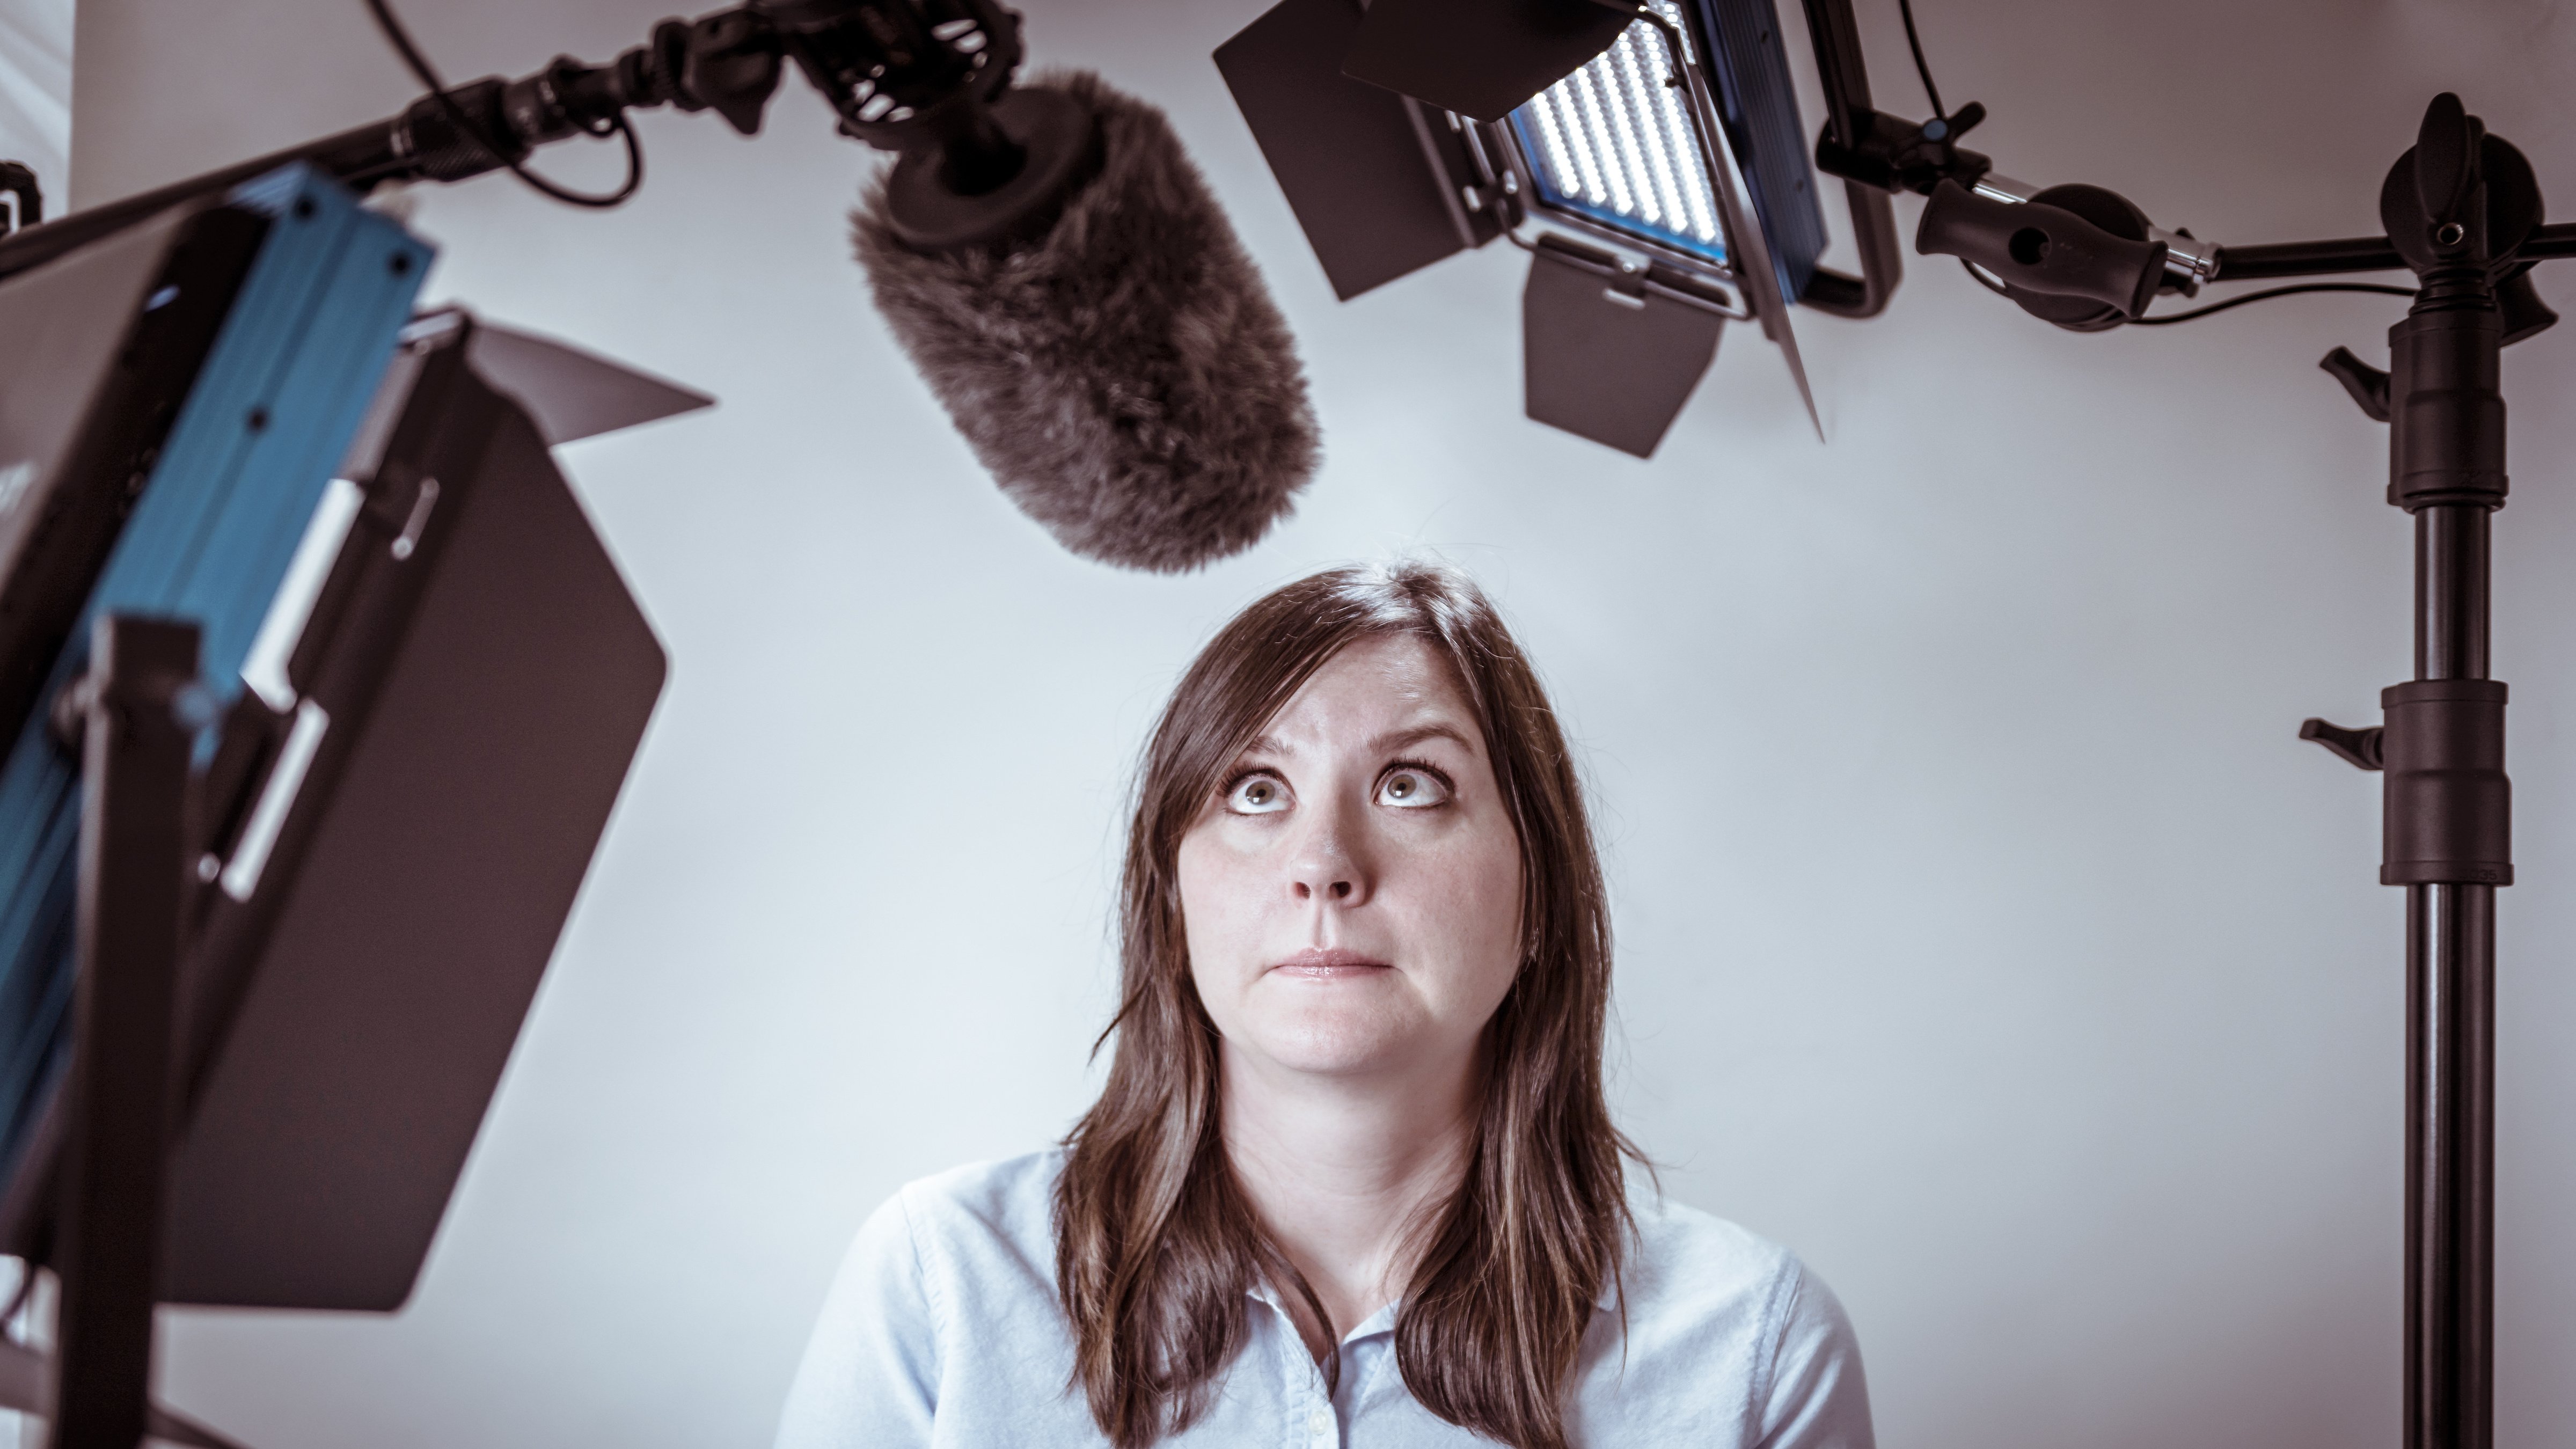 Woman on a video production set looks worriedly up at microphone boom